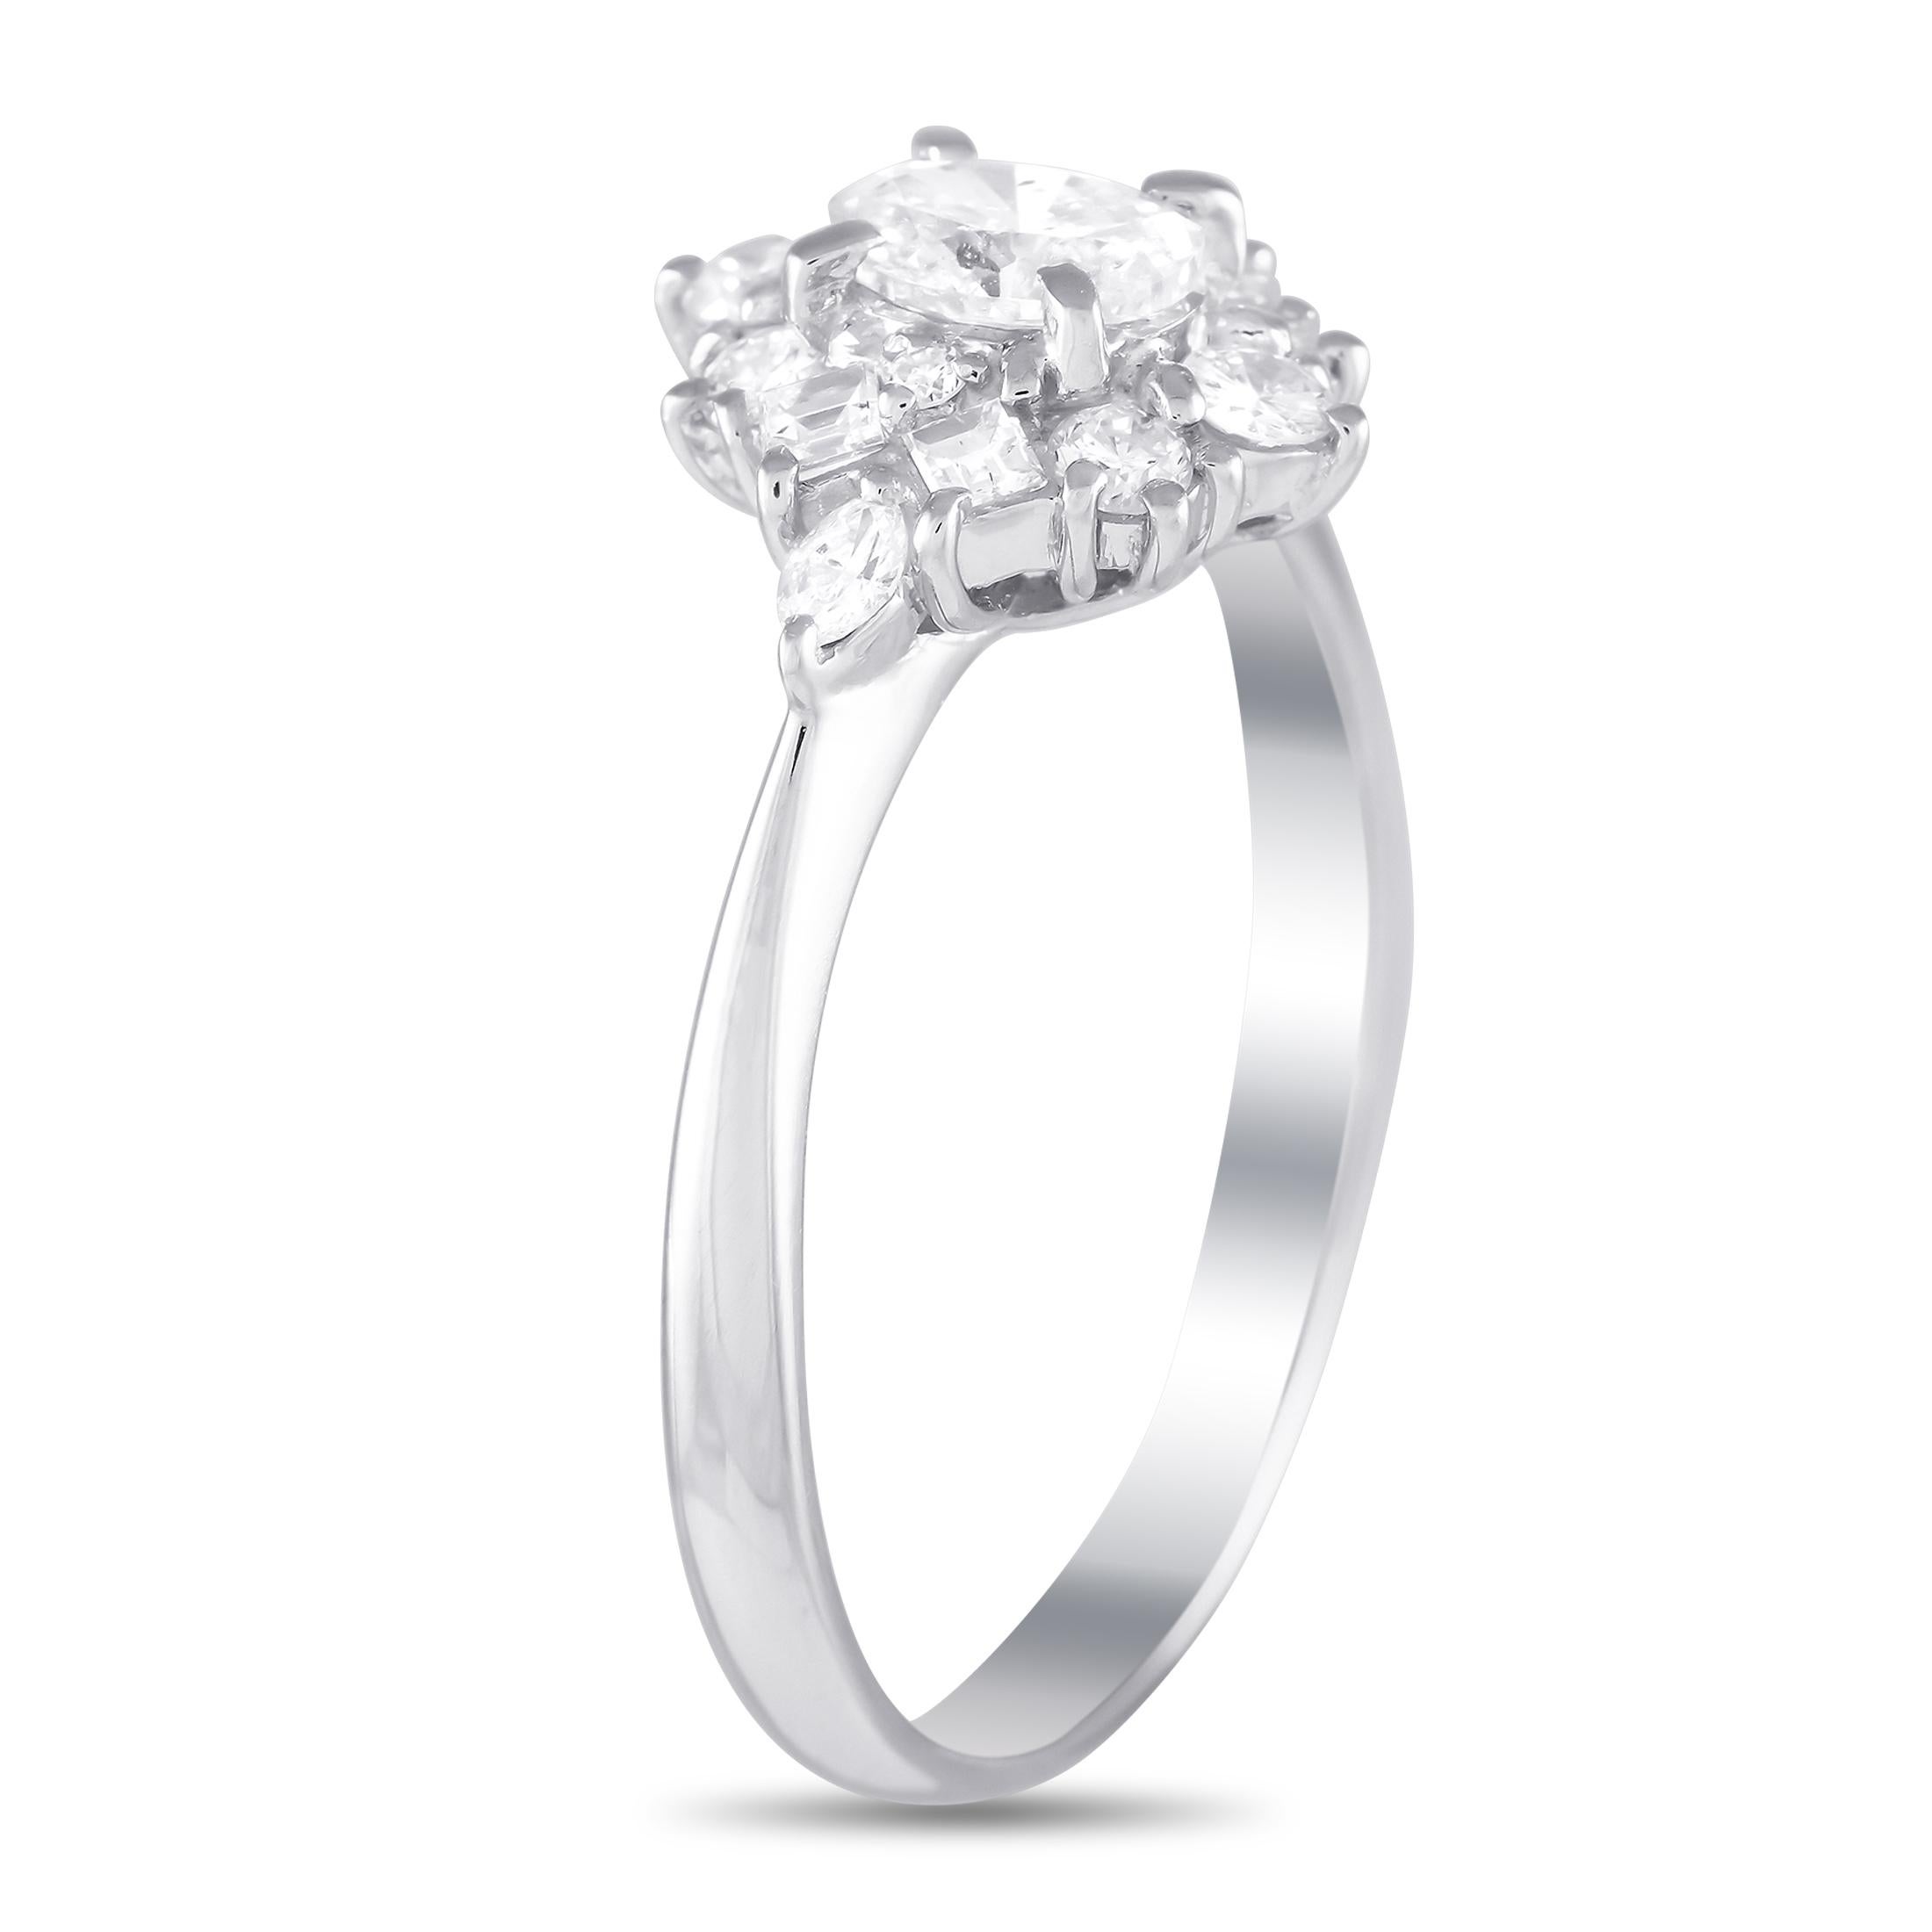 This radiant ring will never go out of style. Simple, elegant, and ideal for anyone with a minimalist aesthetic, the sparkling 0.42 carat diamond center stone is elegantly accented by additional diamonds with a total weight of 0.50 carats. This